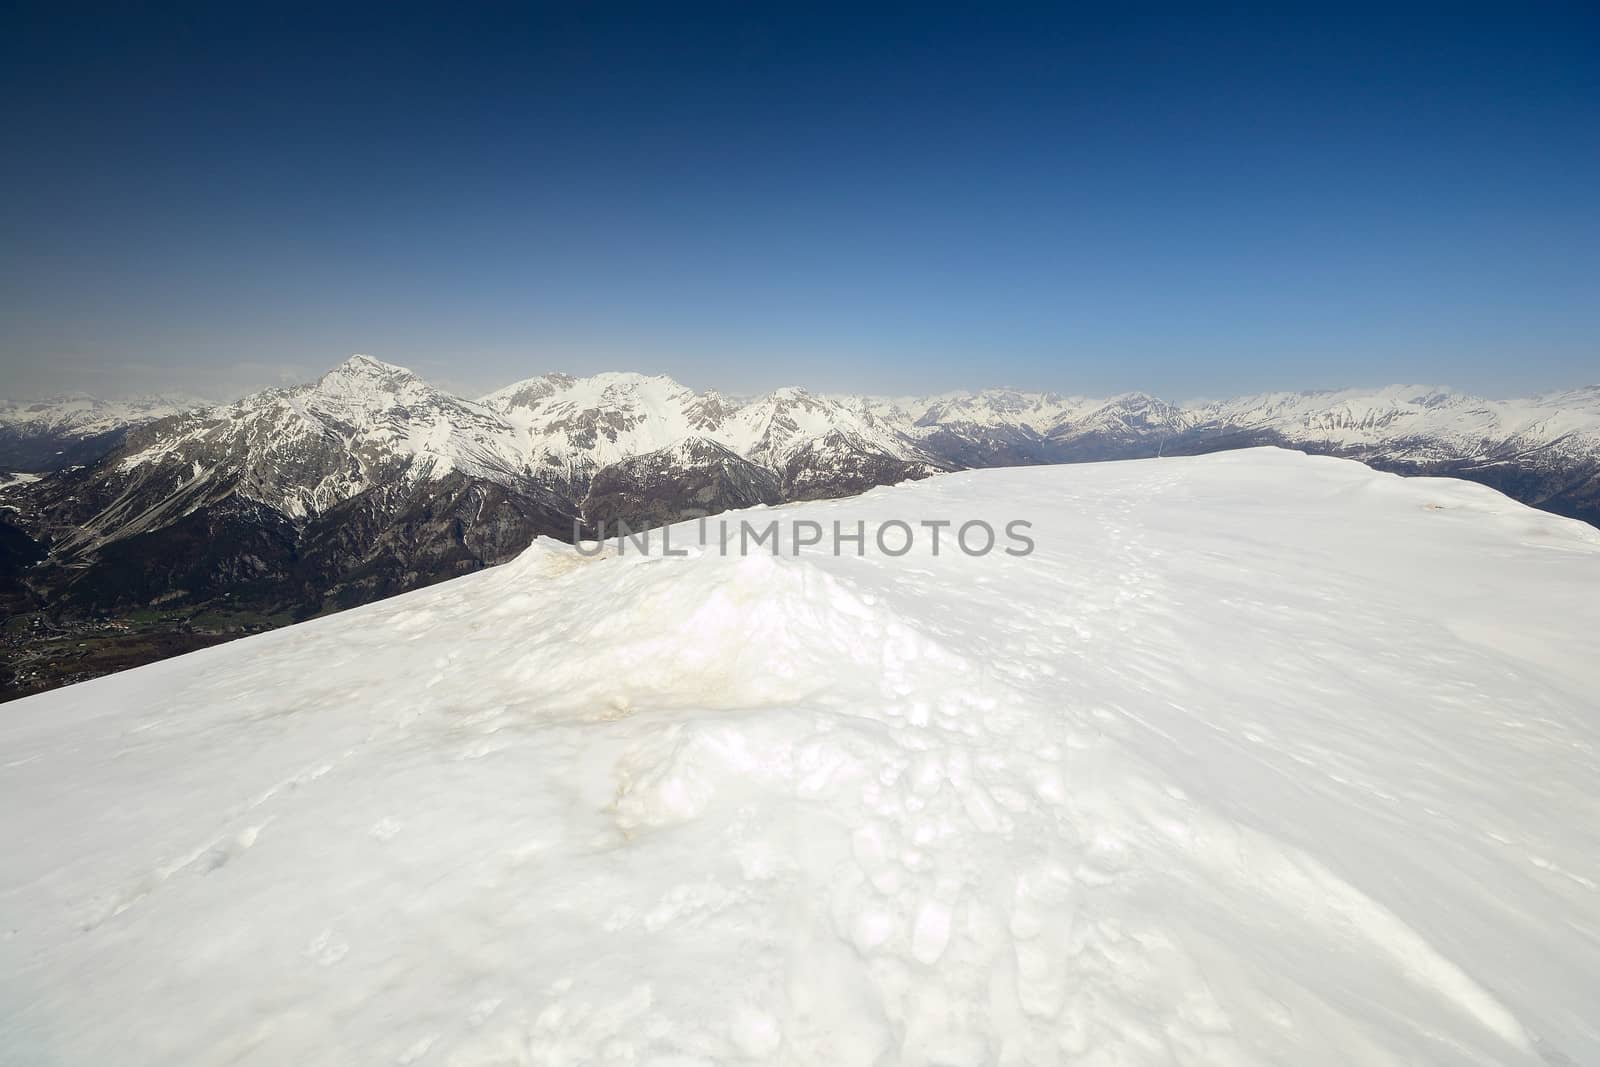 Ski resort and snowy slope in scenic background of high mountain peak